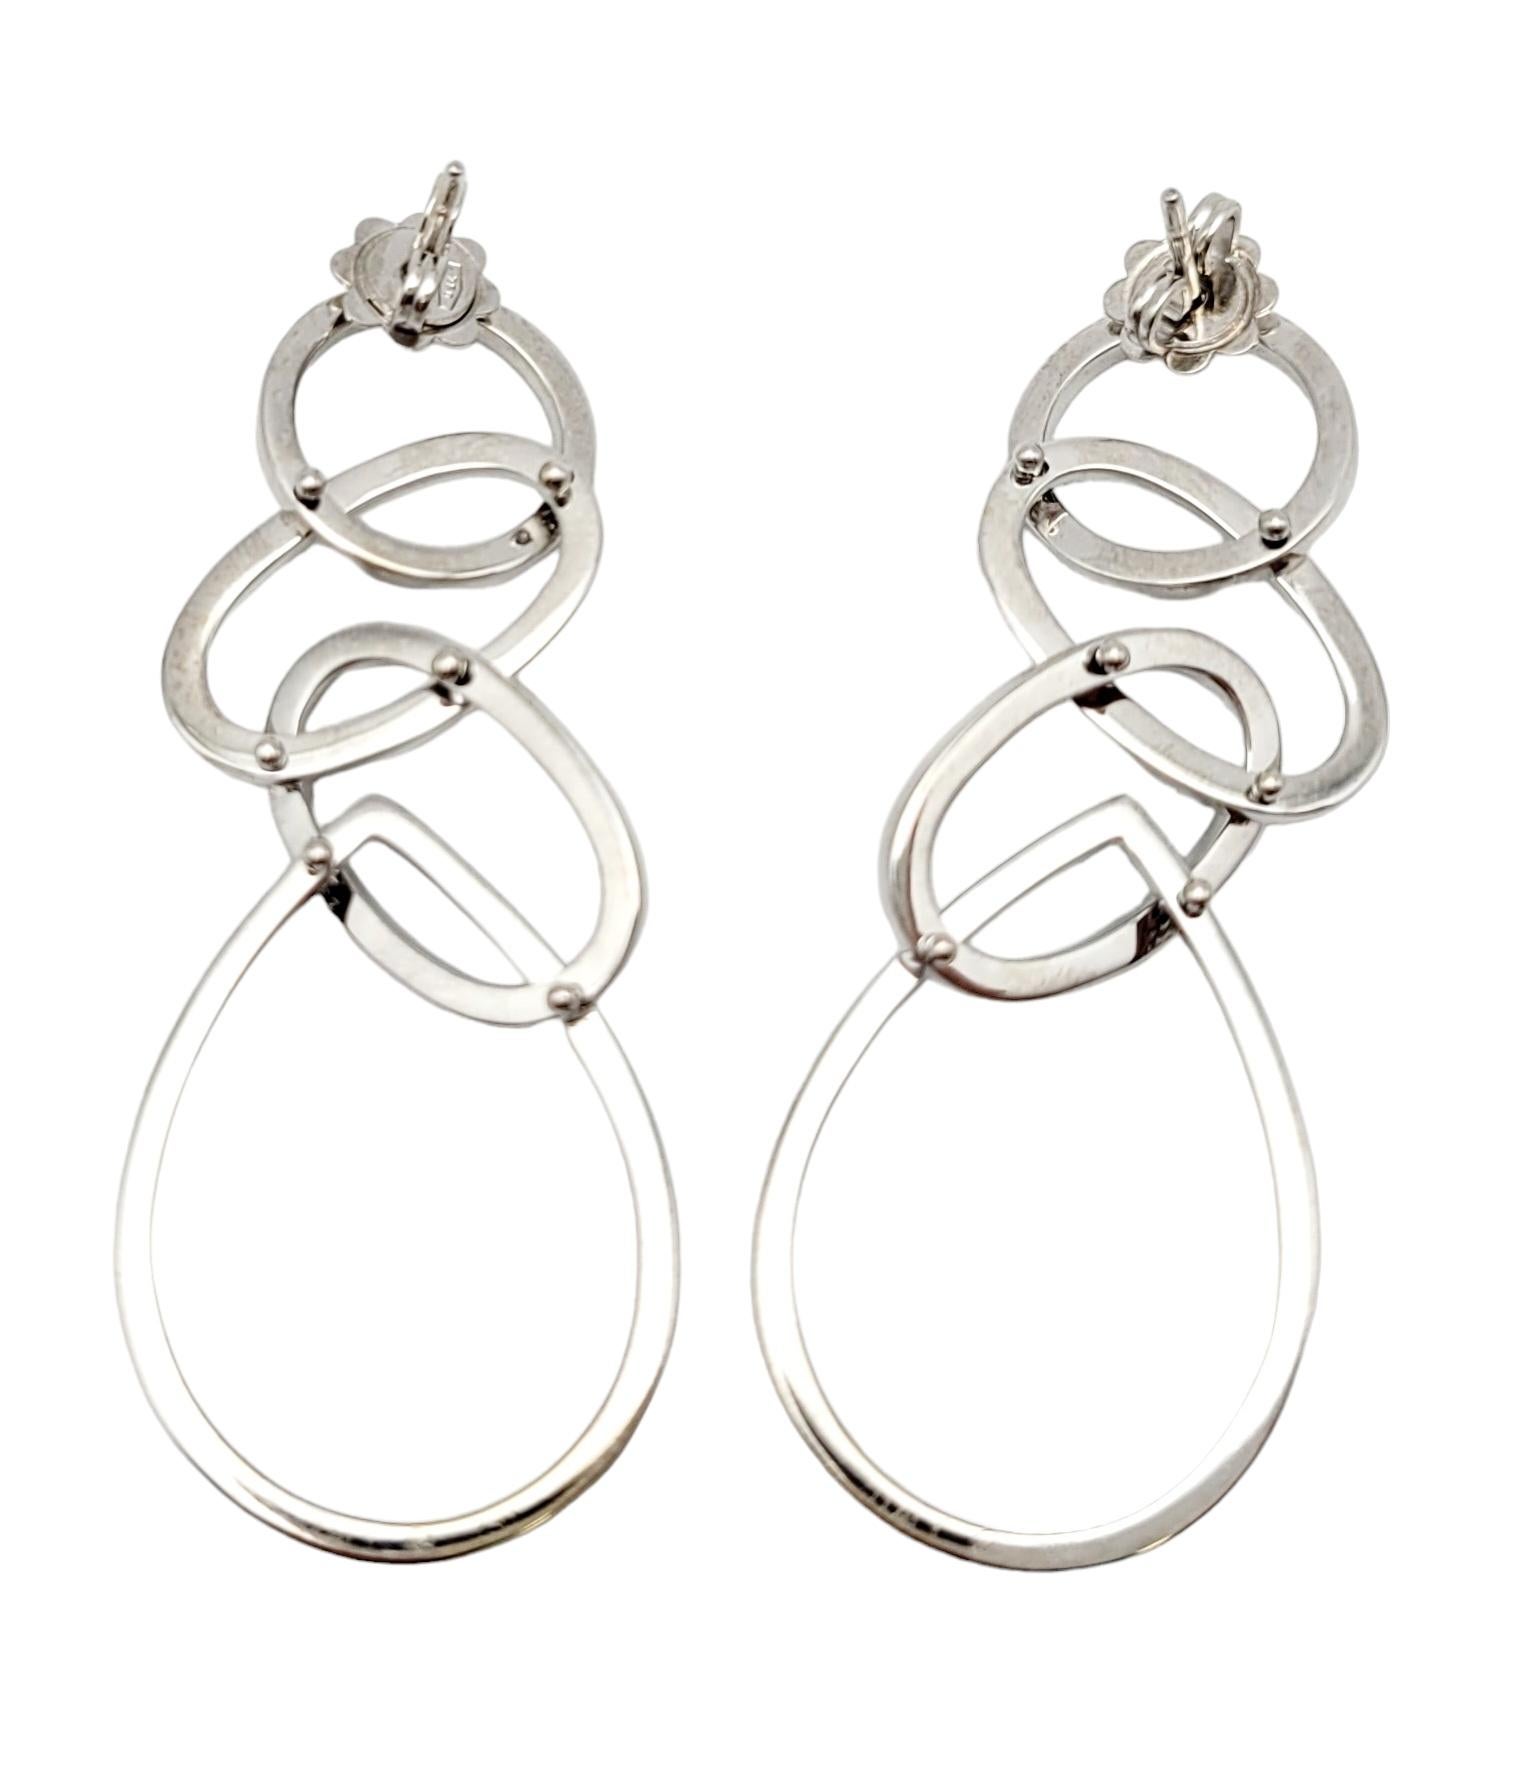 Emanating sophistication and modern elegance, this pair of diamond and gold earrings is a true work of art. Expertly fashioned from gleaming 18 karat white gold, the earrings showcase a distinctive dangle design that seamlessly blends interlocking